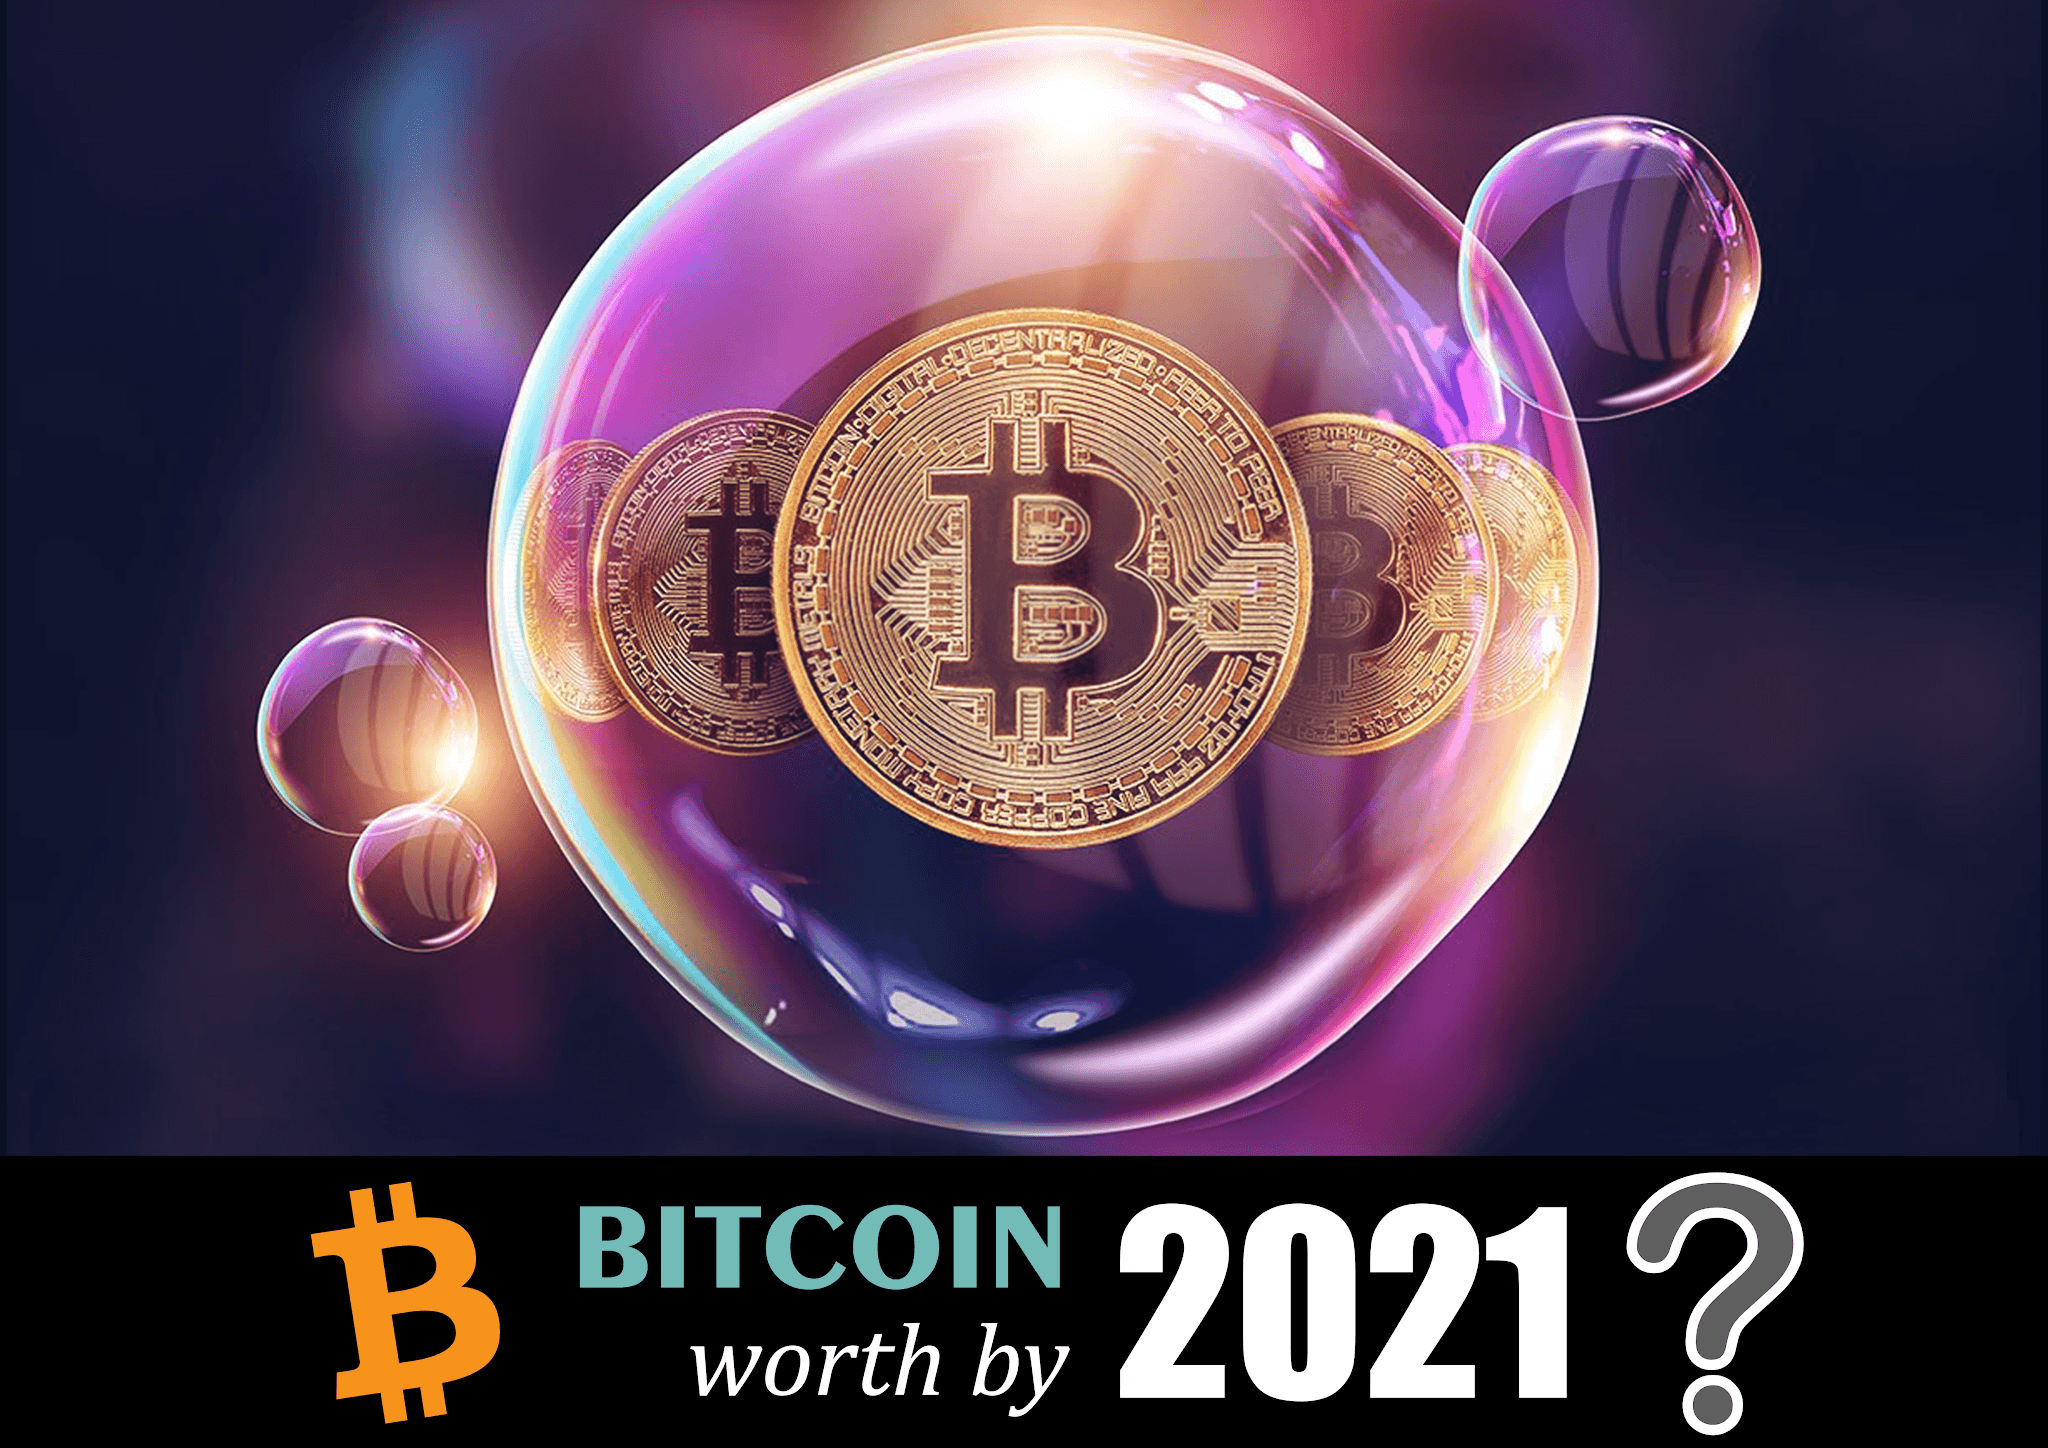 Will The Price Of Bitcoin Be Worth By 2021-2026?